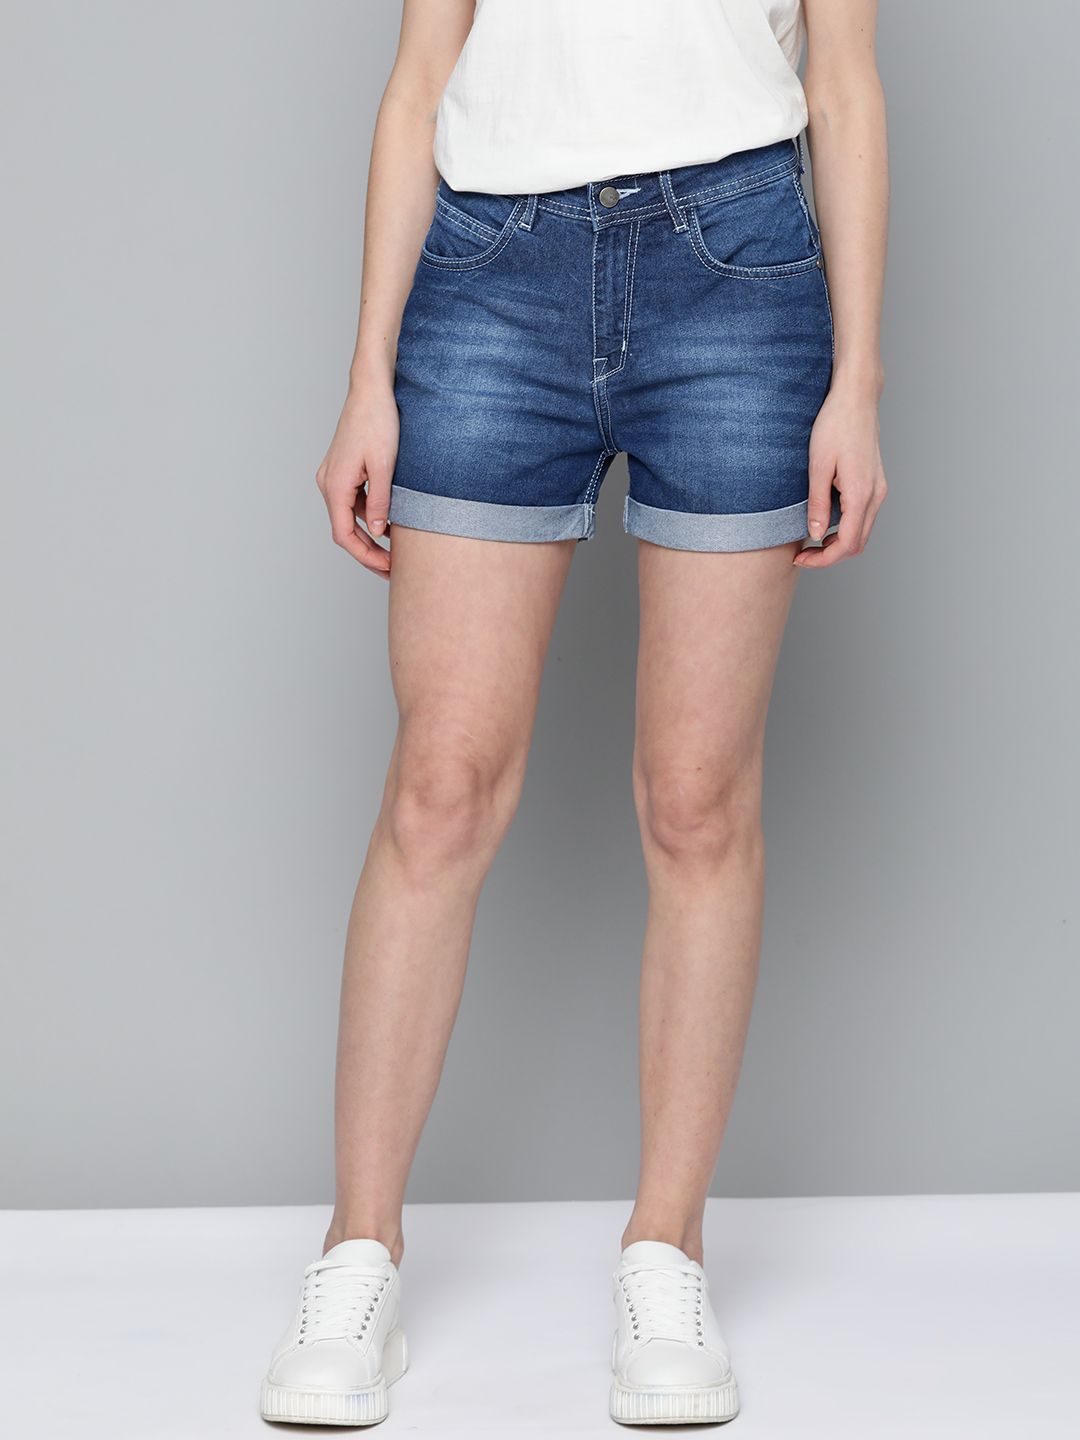 Mast & Harbour Women Navy Blue Washed Regular Fit Denim Shorts Price in India